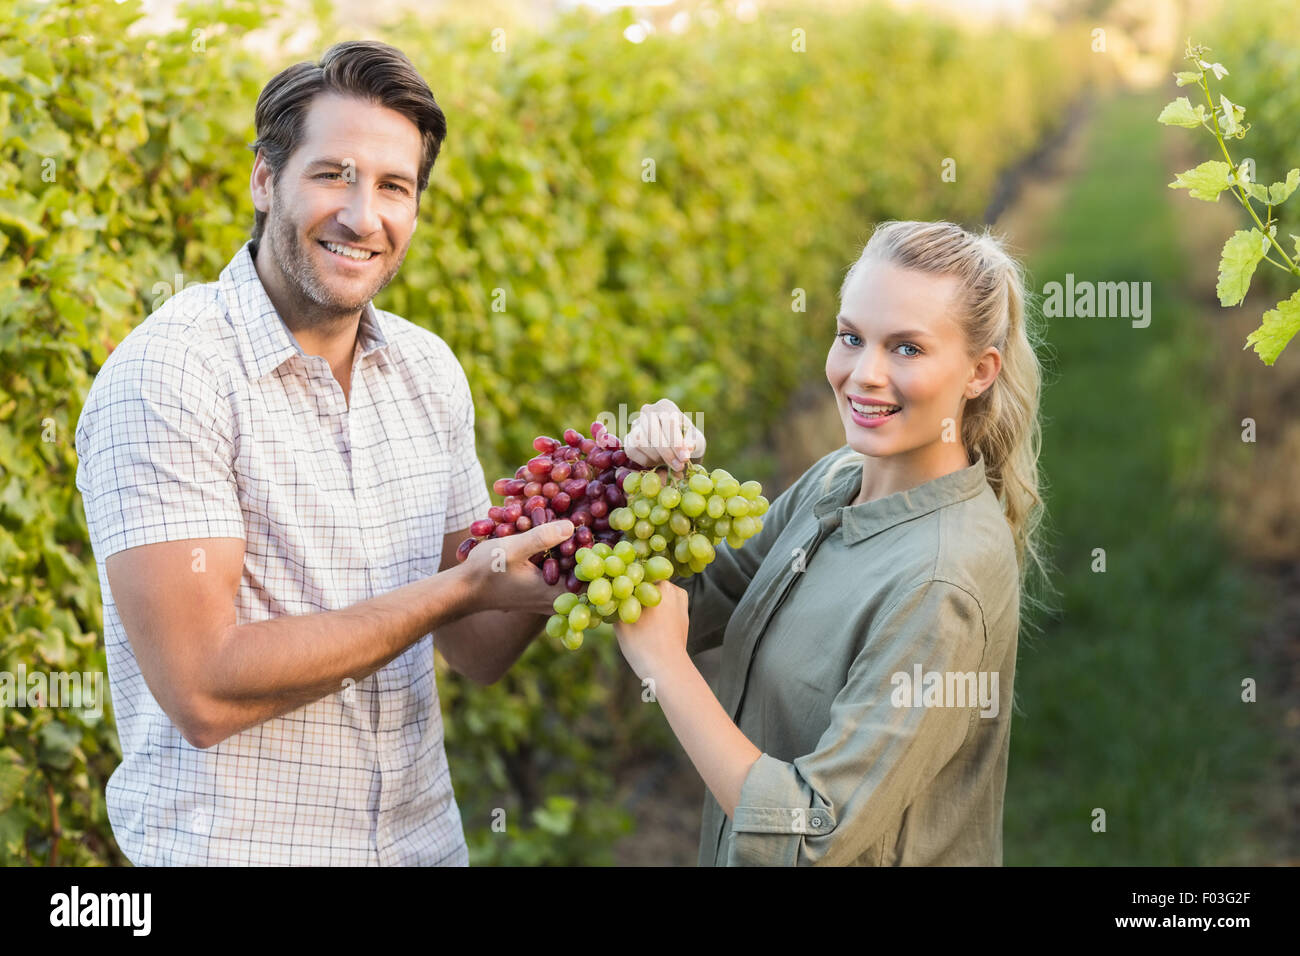 Two young happy vintners holding grapes Stock Photo